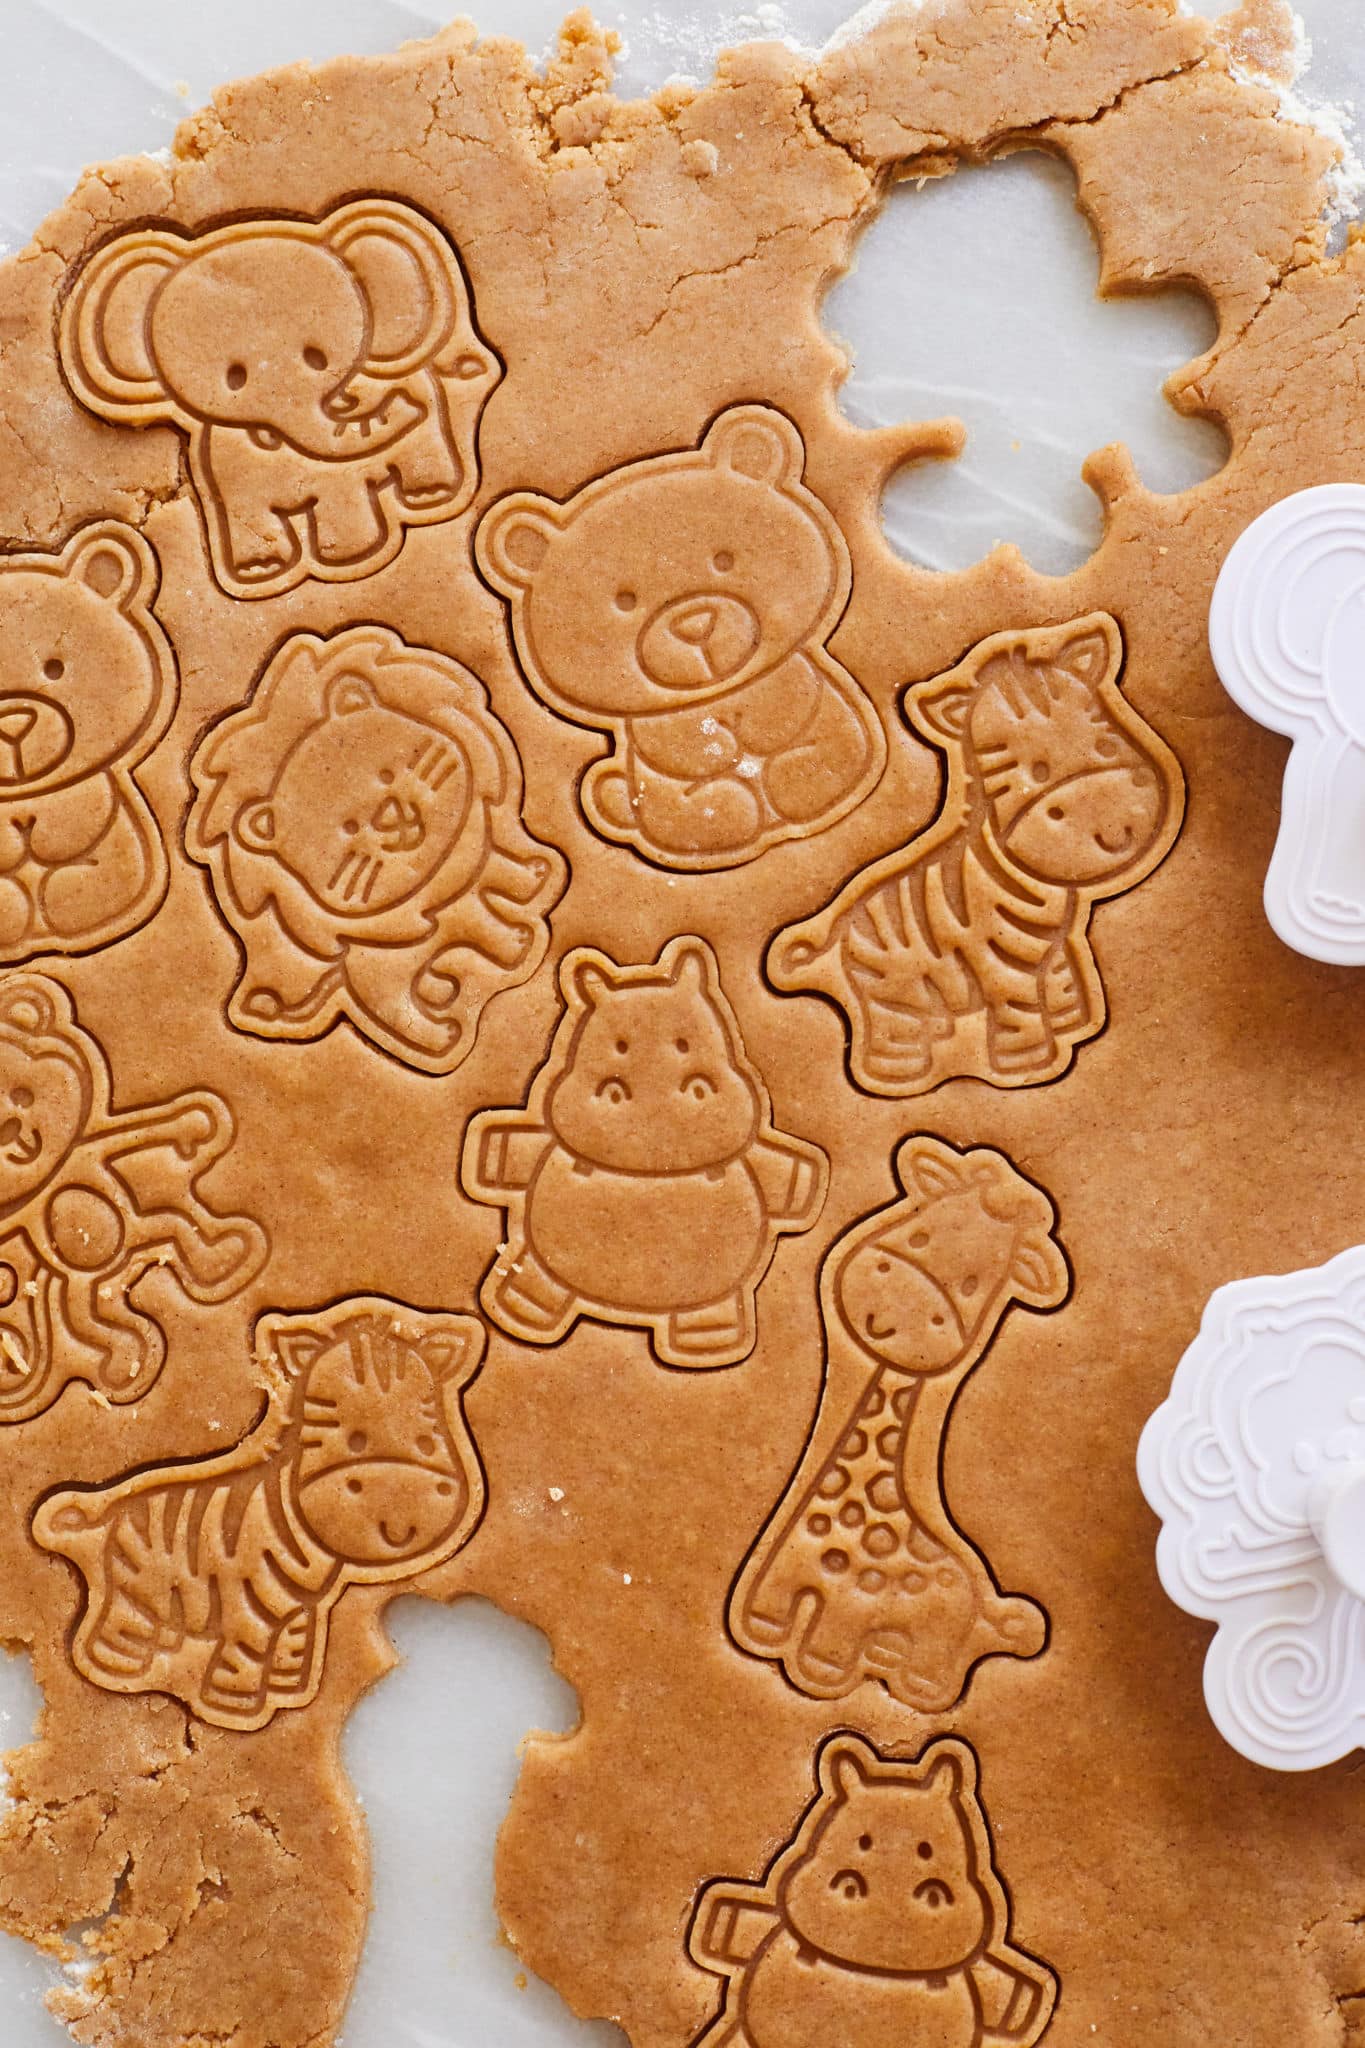 Animal Cracker Shapes being cut out of the simple to make dough.